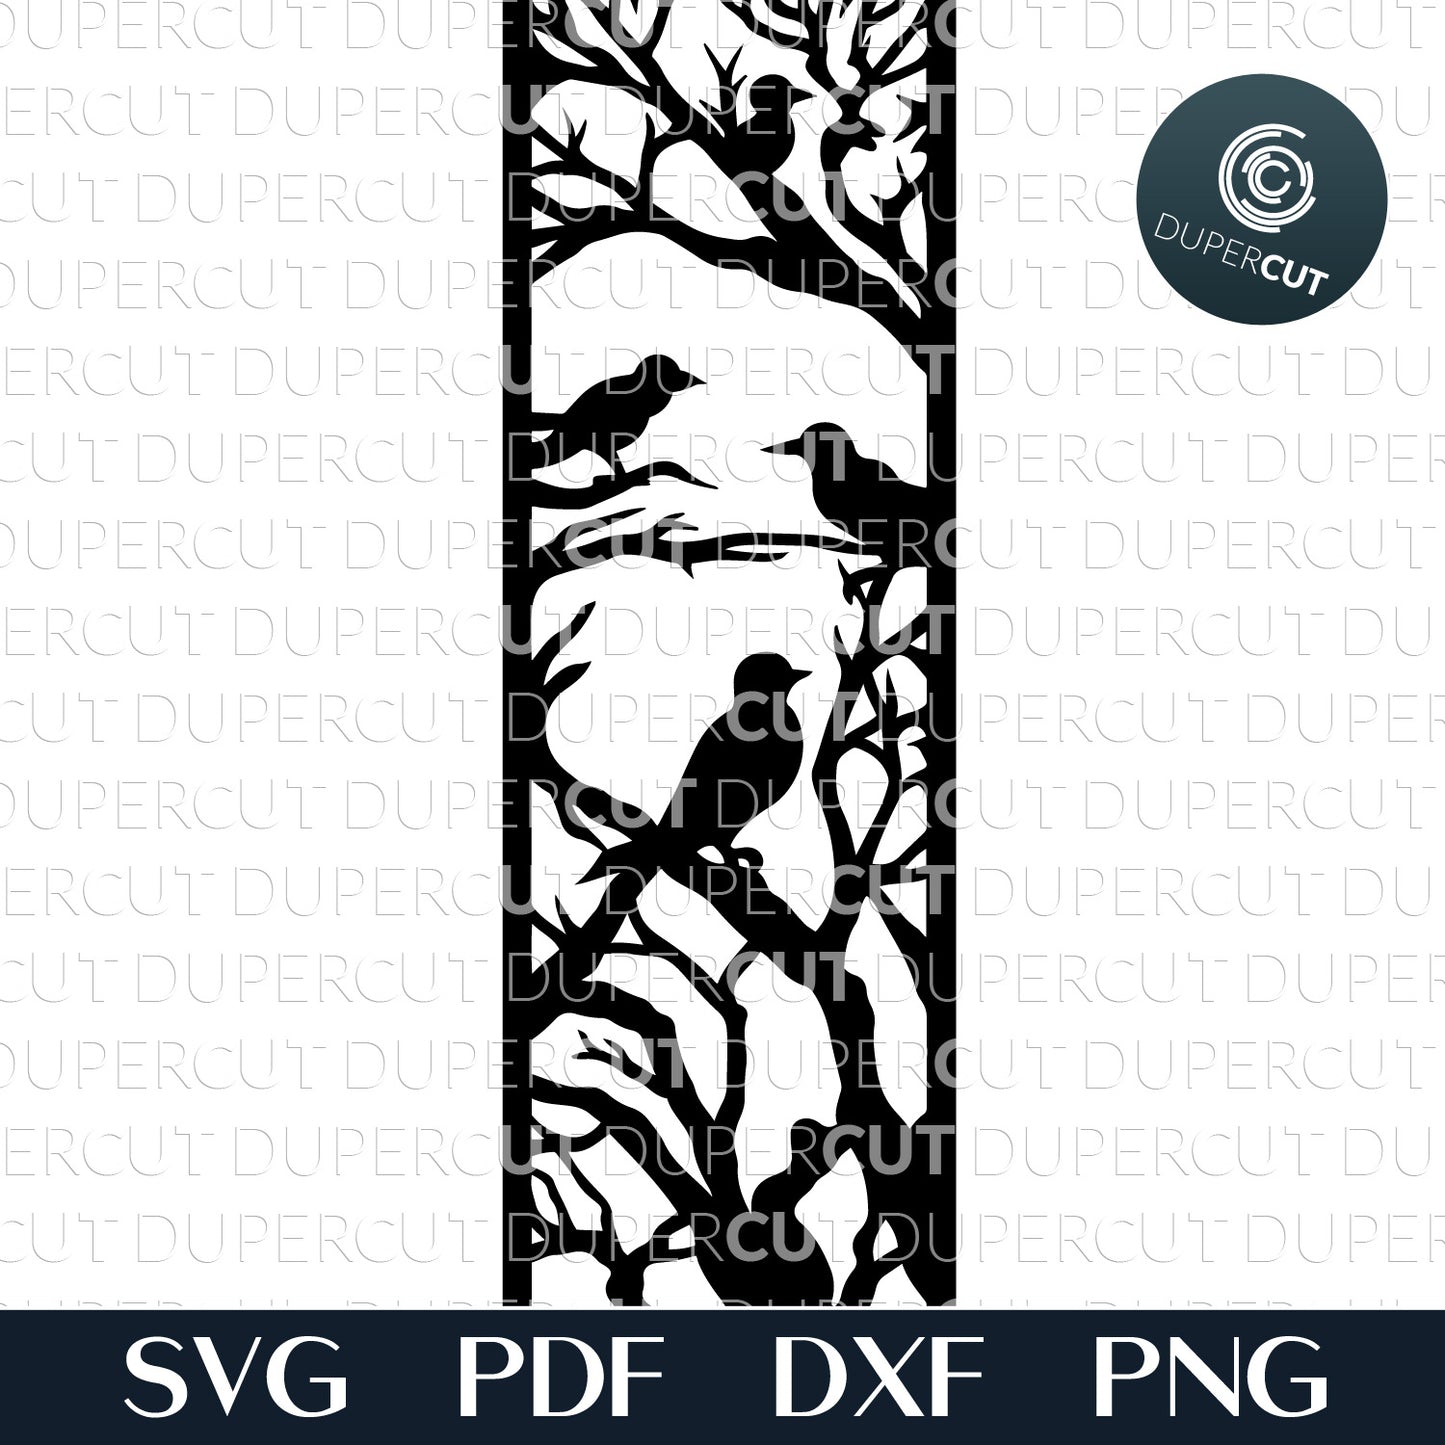 DIY birds on a tree detailed bookmark - SVG DXF vector files for laser cutting machines, Glowforge, Cricut, Silhouette, CNC plasma machines by www.DuperCut.com